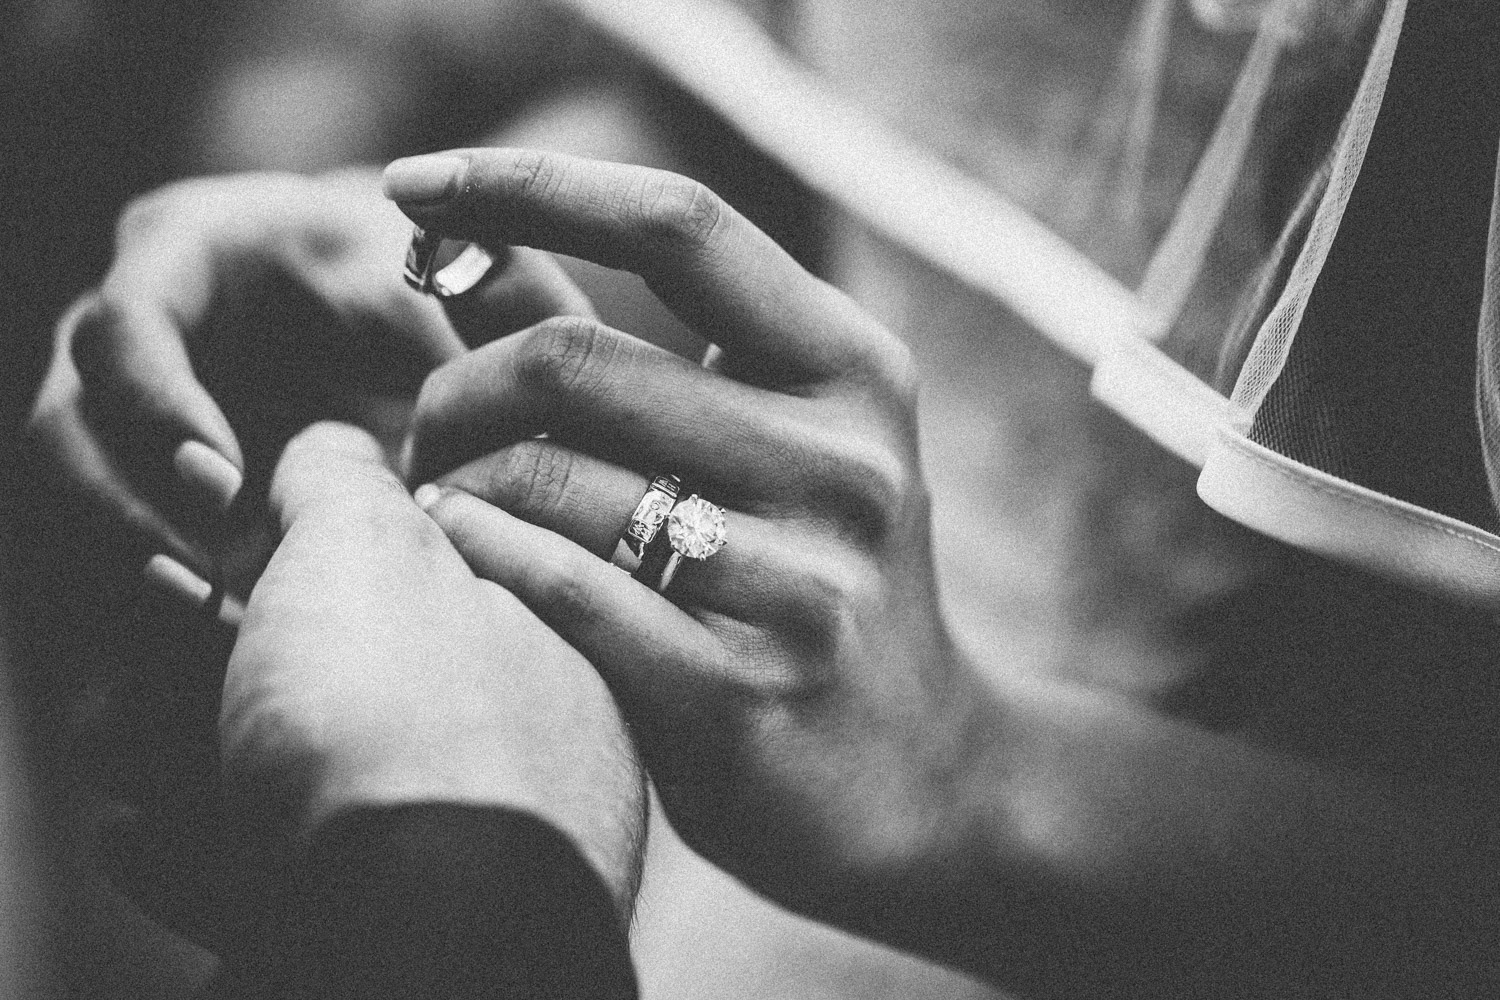 A bride and groom exchange rings during their wedding ceremony.